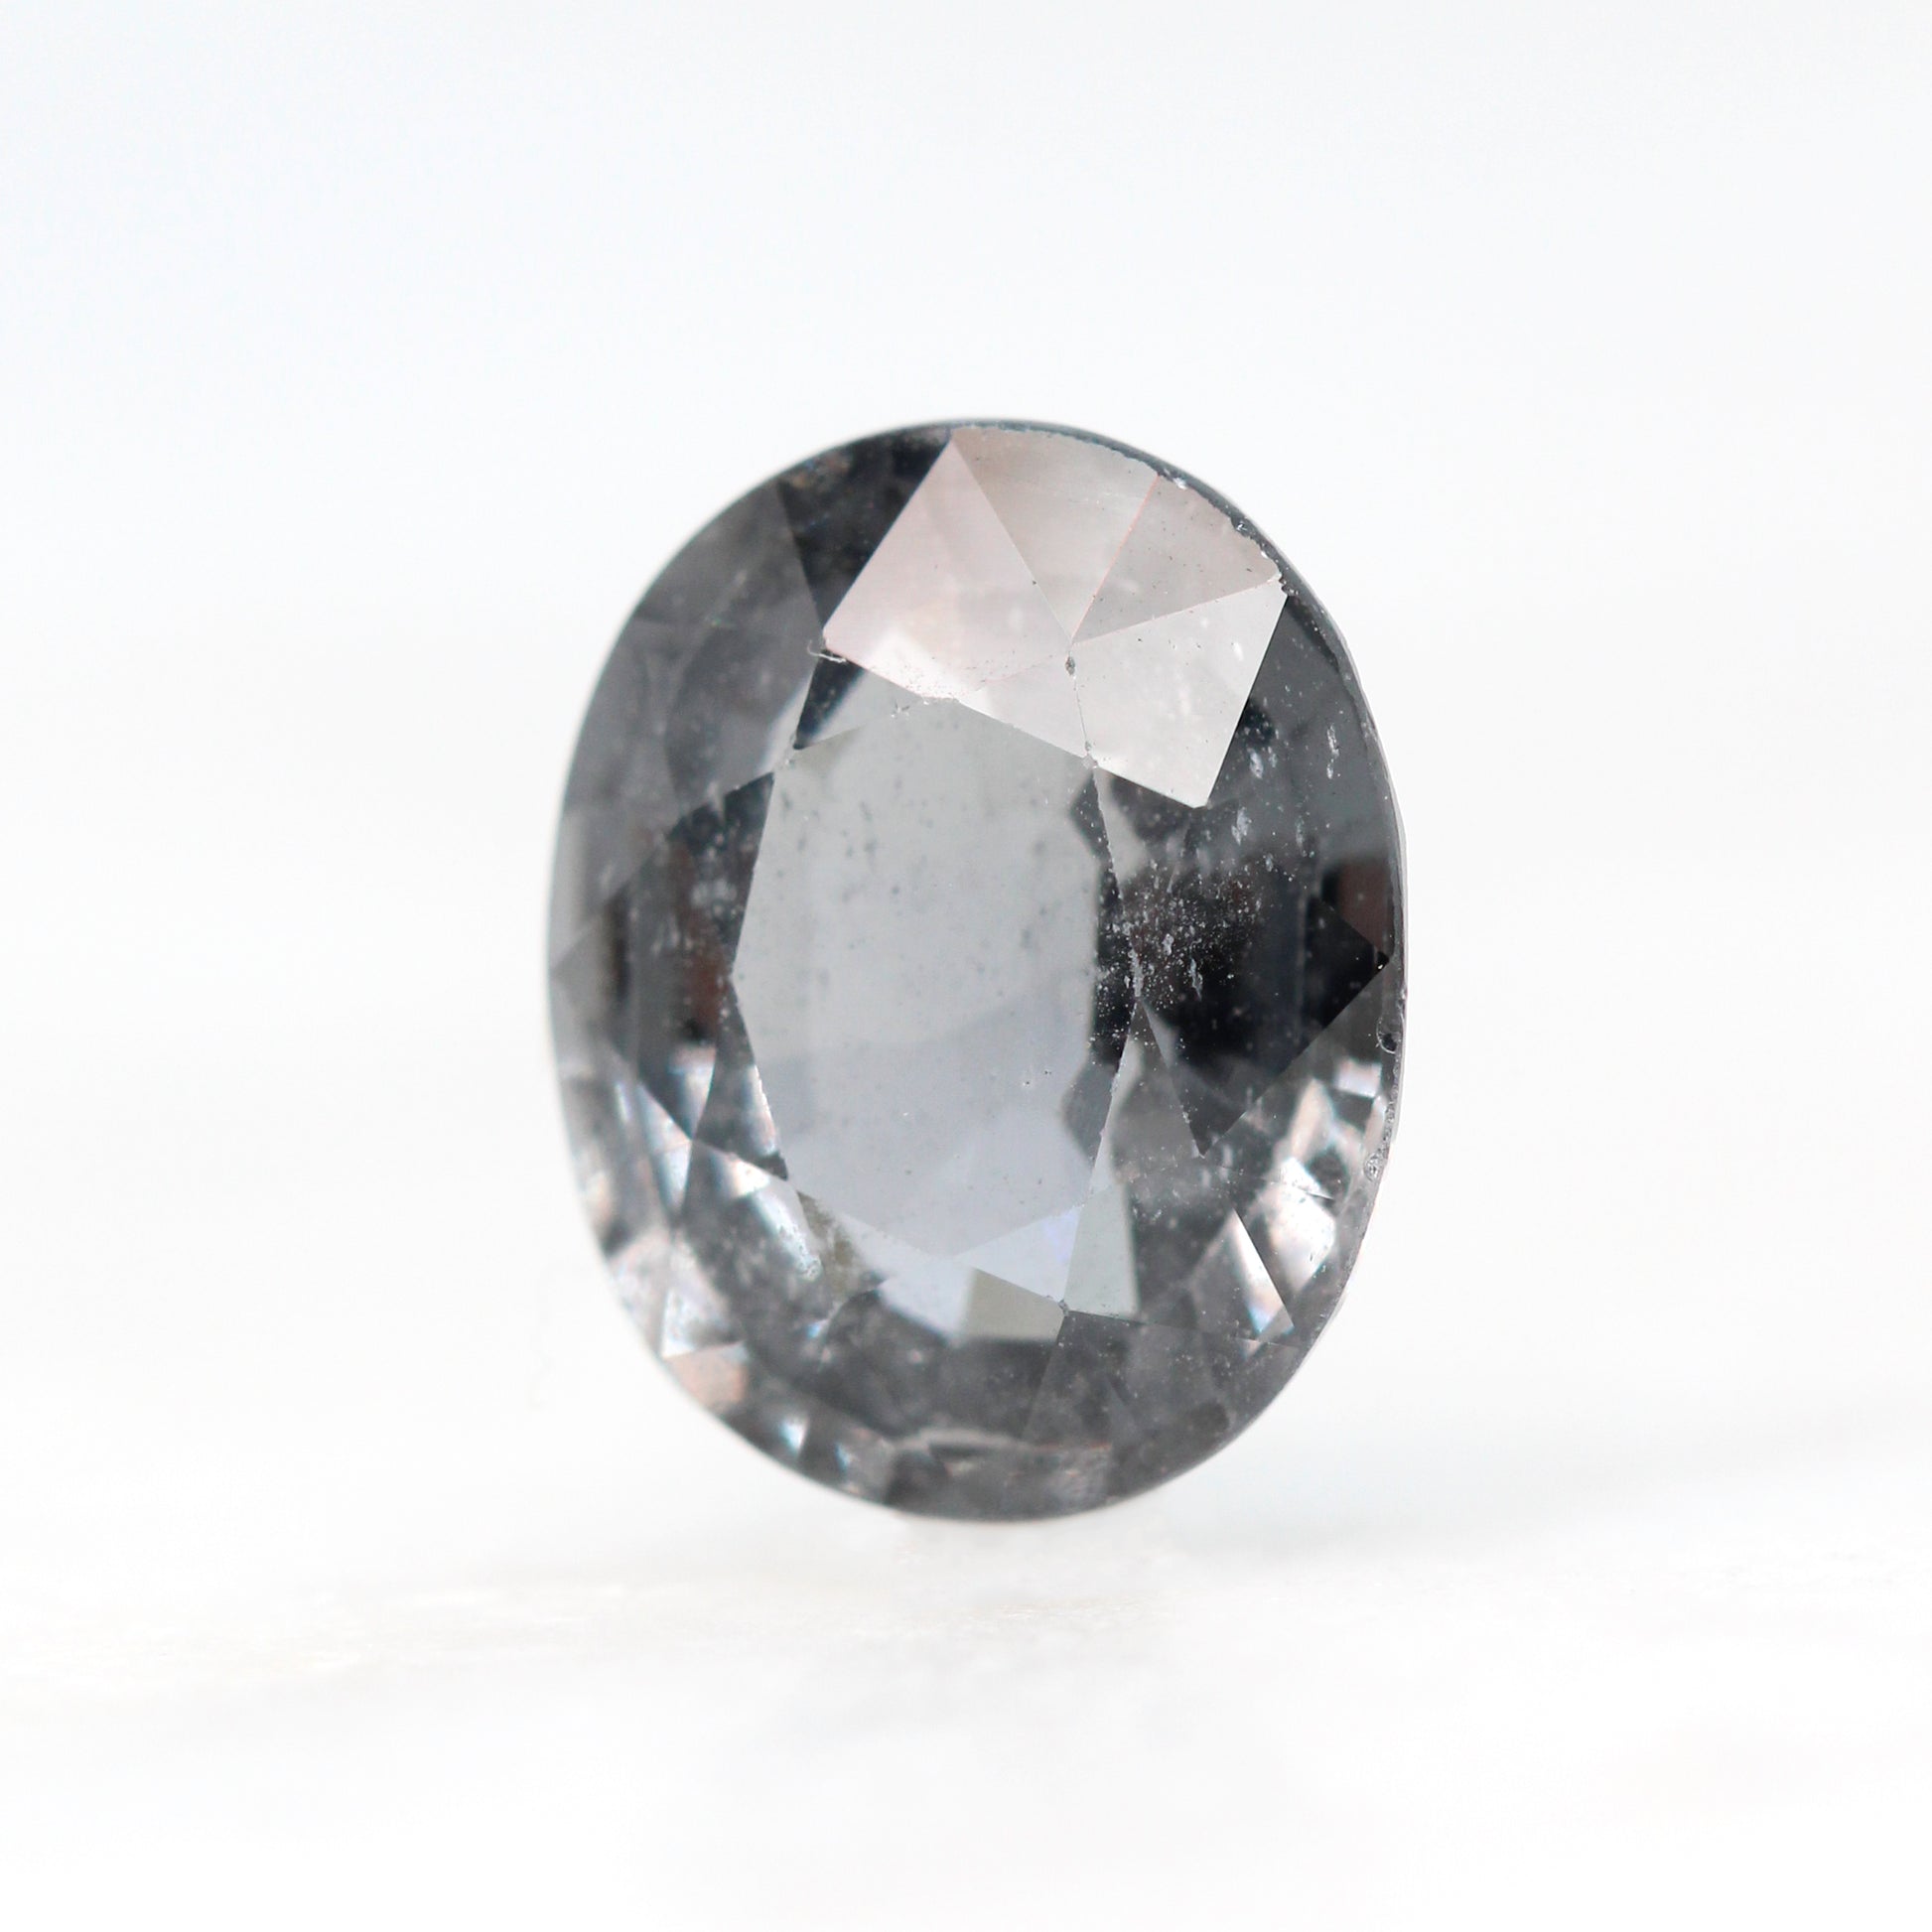 3.65 Carat Clear Gray-Blue Oval Spinel for Custom Work - Inventory Code GOSP365 - Midwinter Co. Alternative Bridal Rings and Modern Fine Jewelry